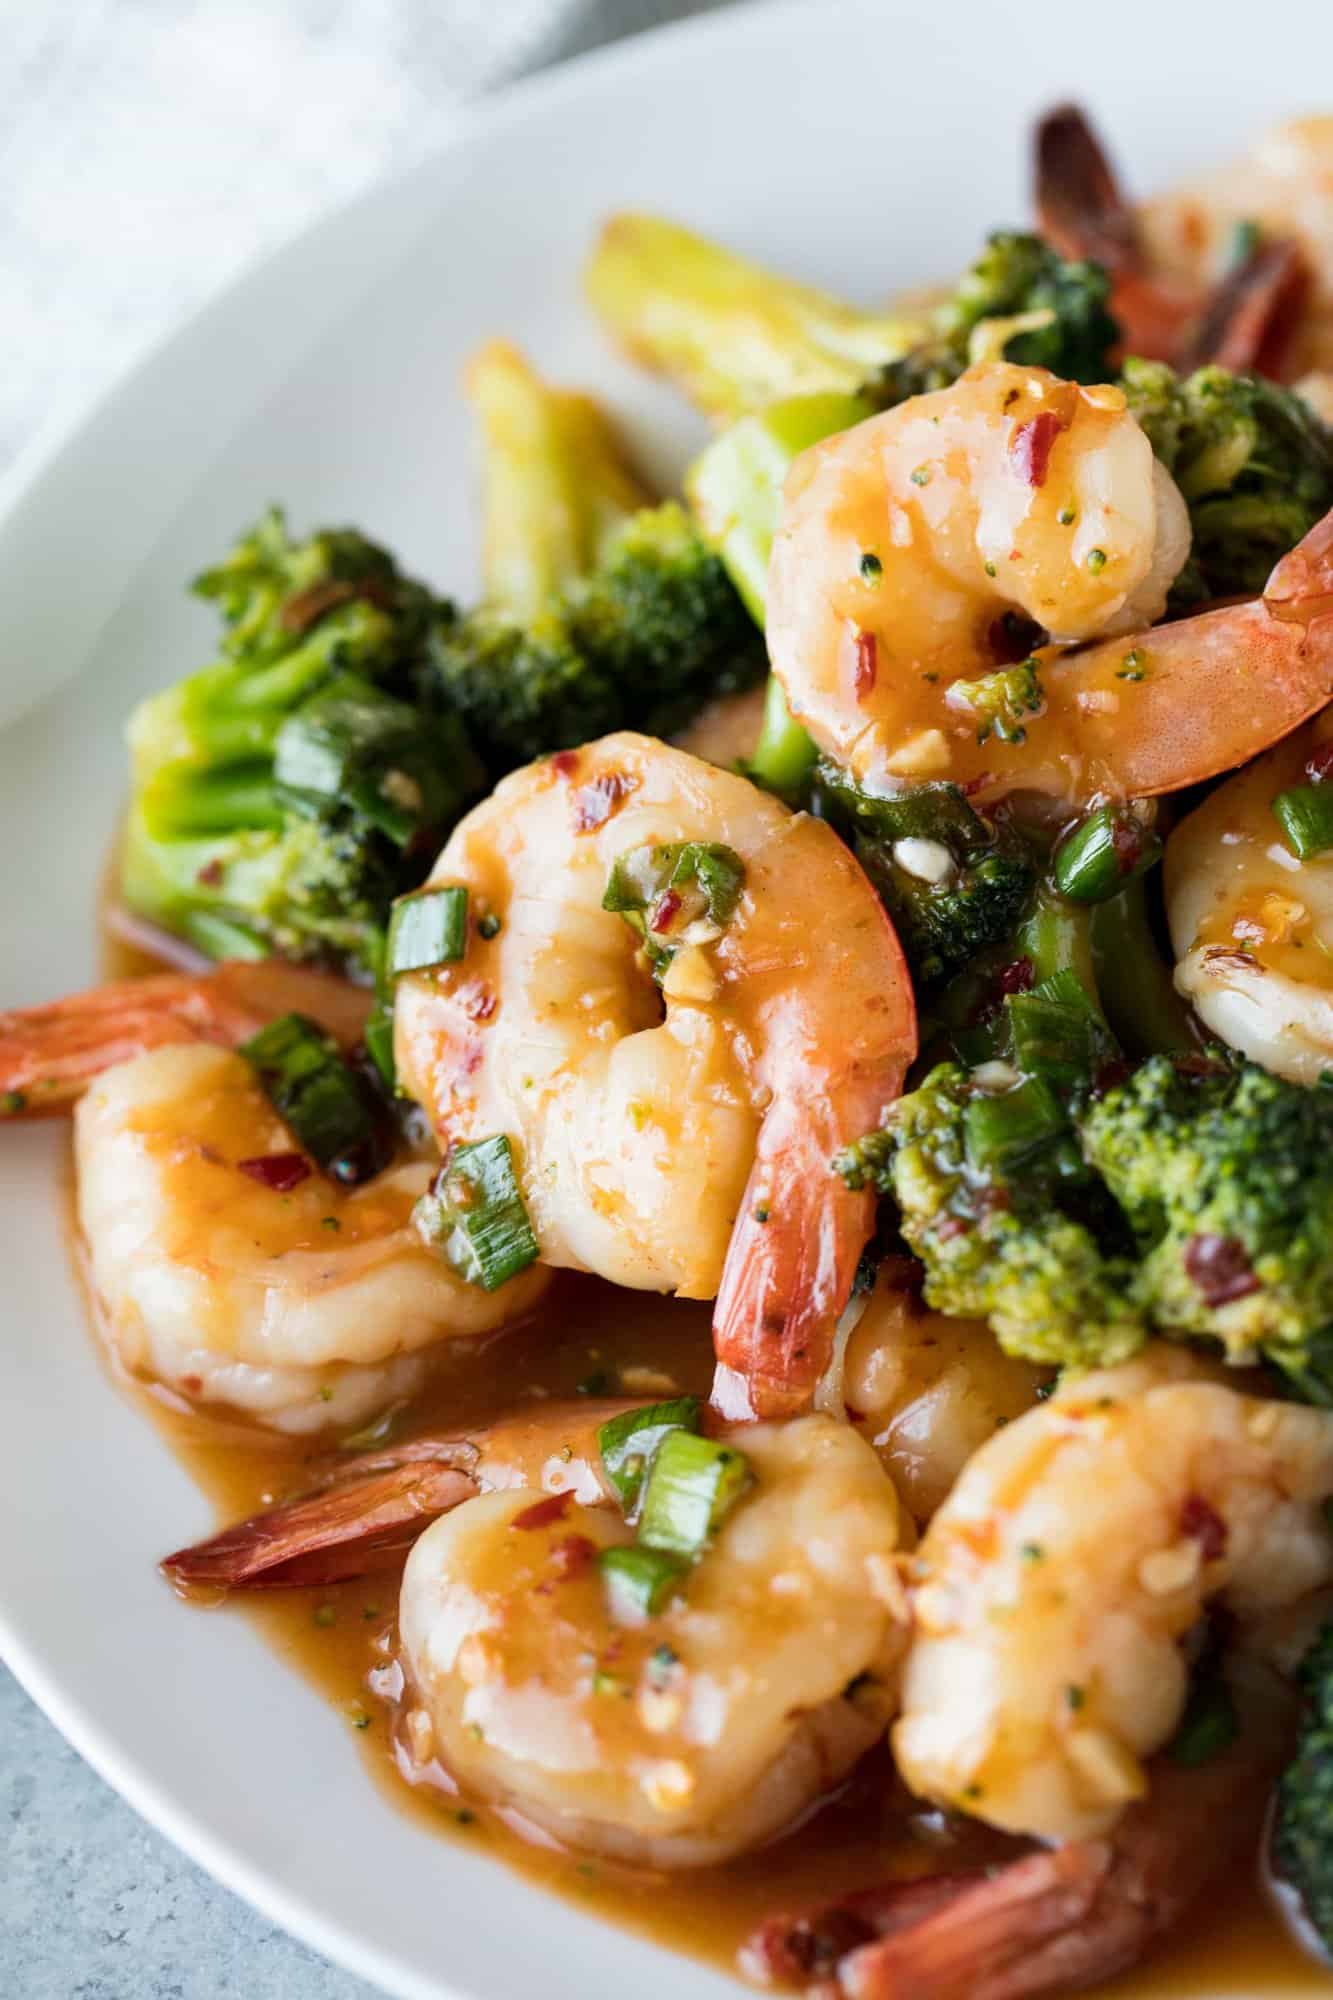 Spicy Szechuan Shrimp and Broccoli is a super easy way to enjoy this American Chinese takeout favorite at home and it's ready in just 15 minutes!